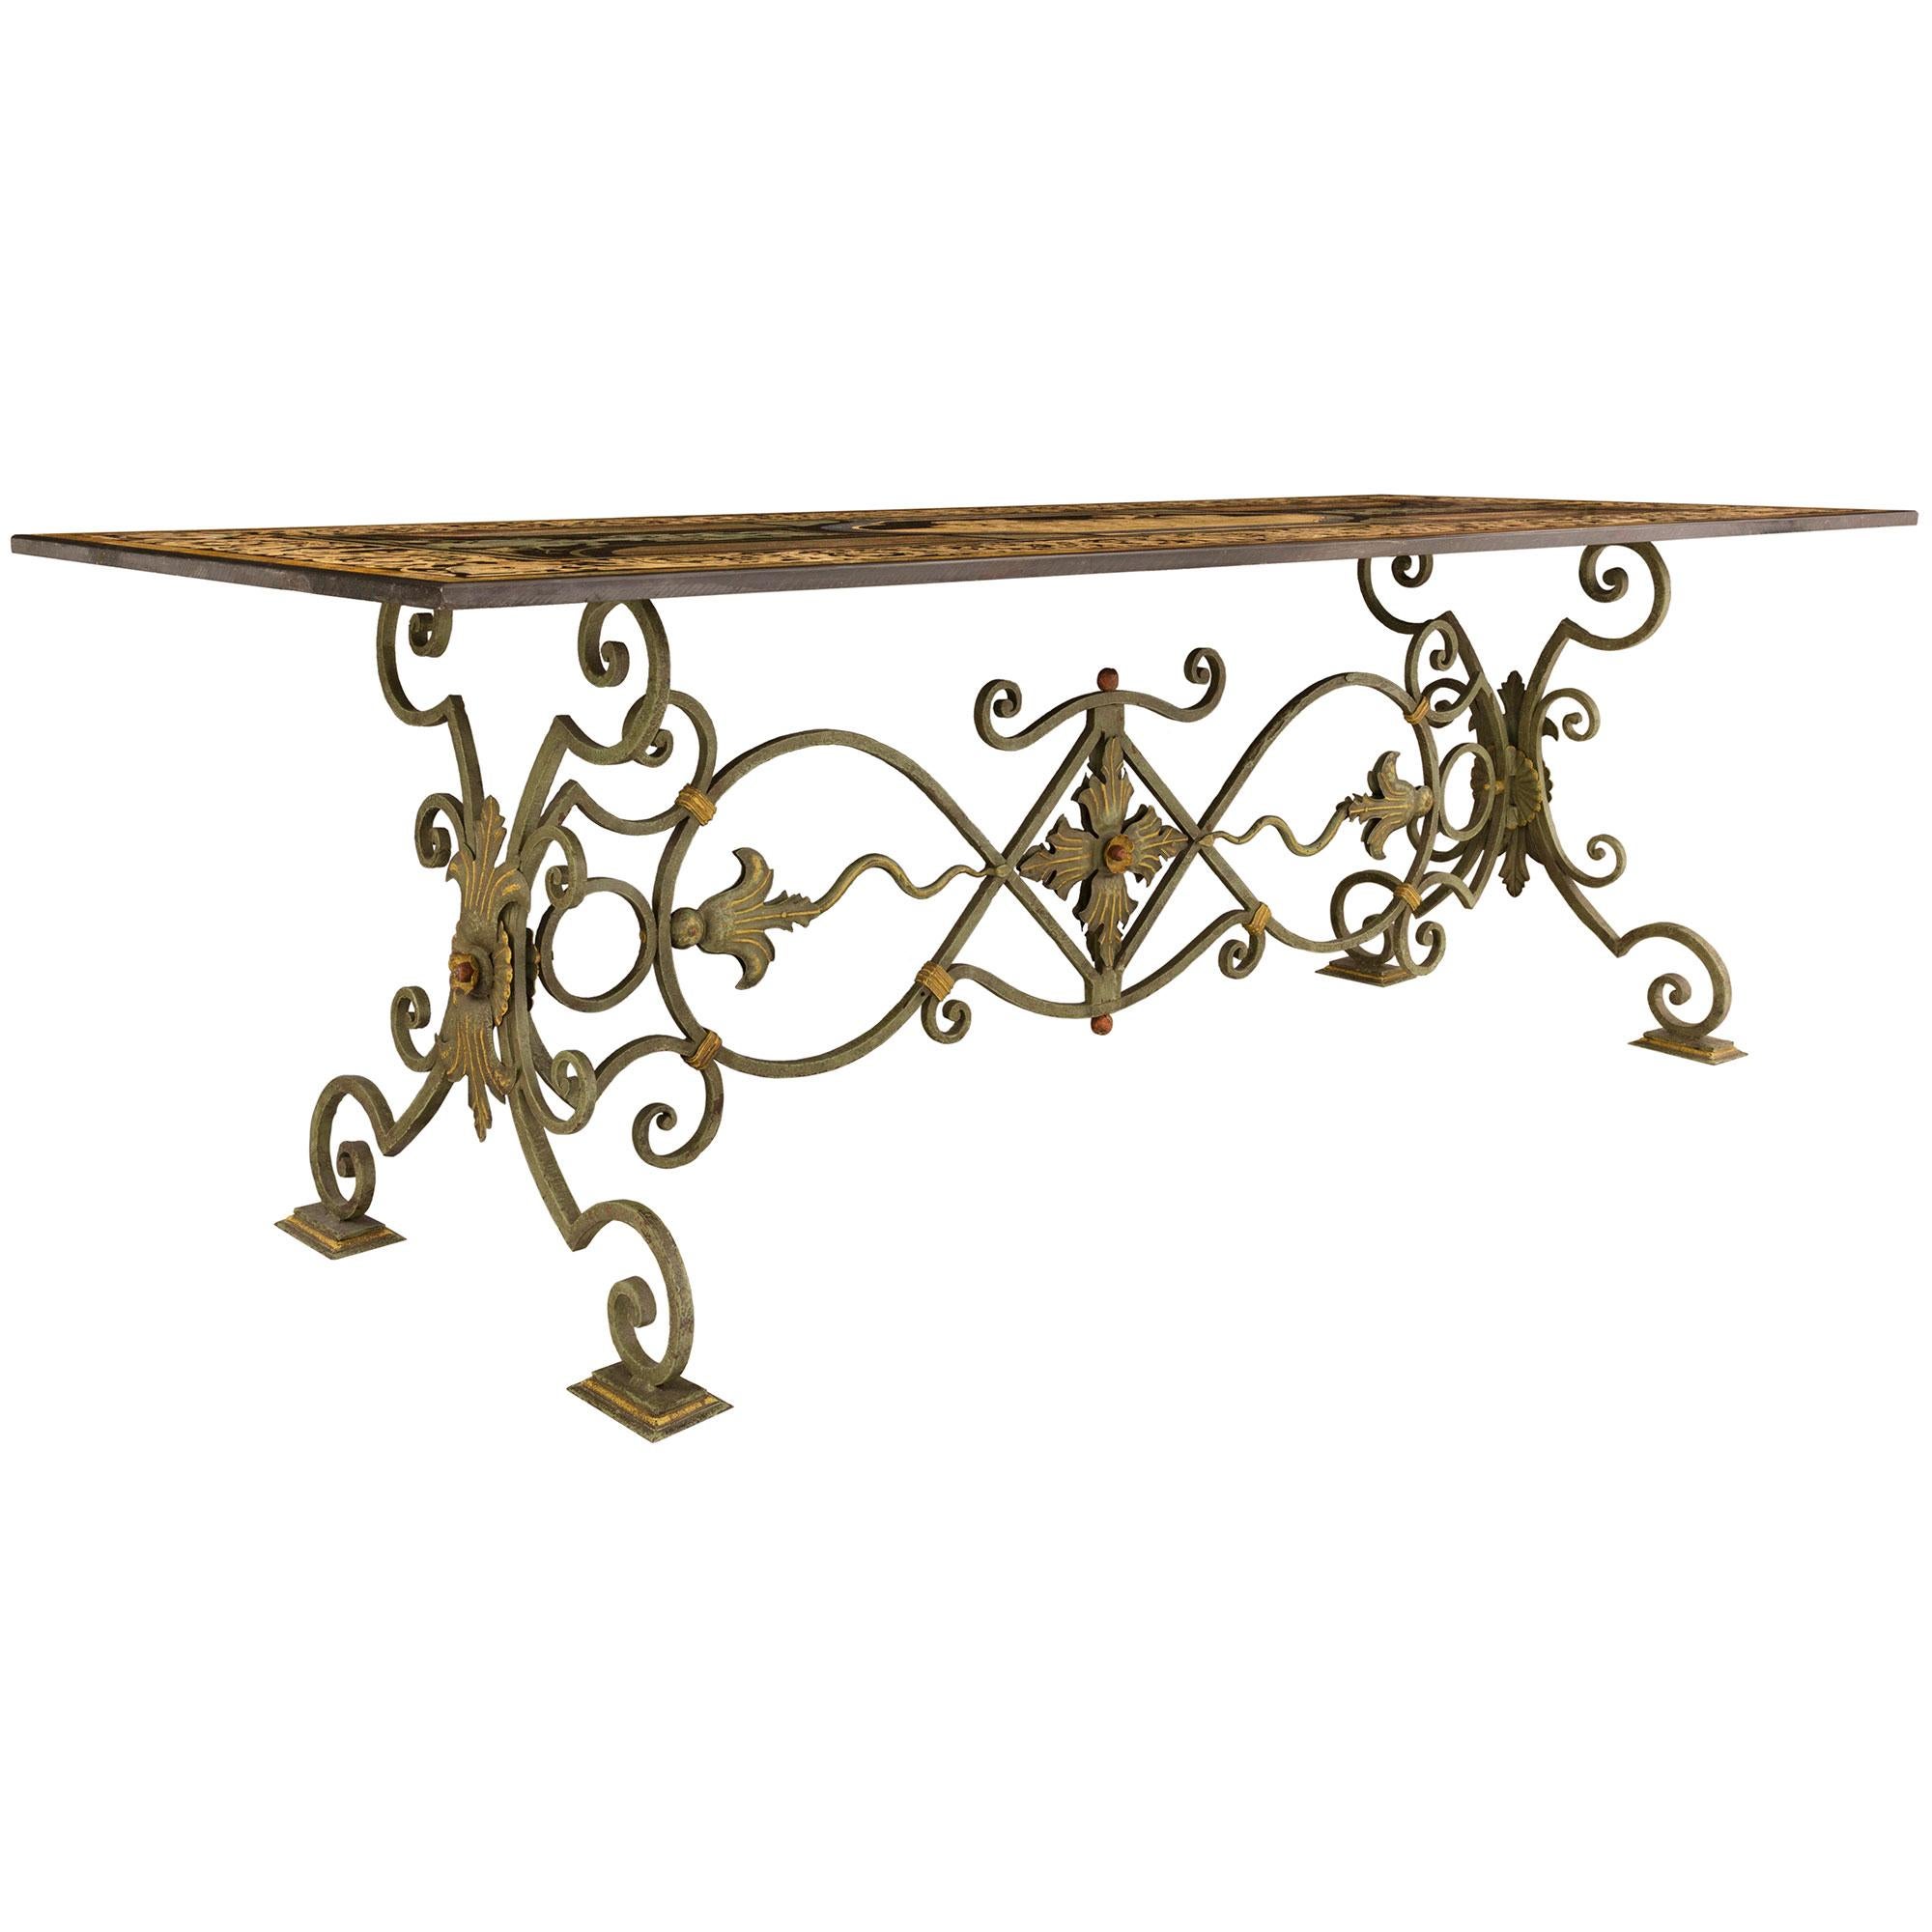 Italian 19th Century Wrought Iron, Gilt and Scagliola Center/Dining Table For Sale 1